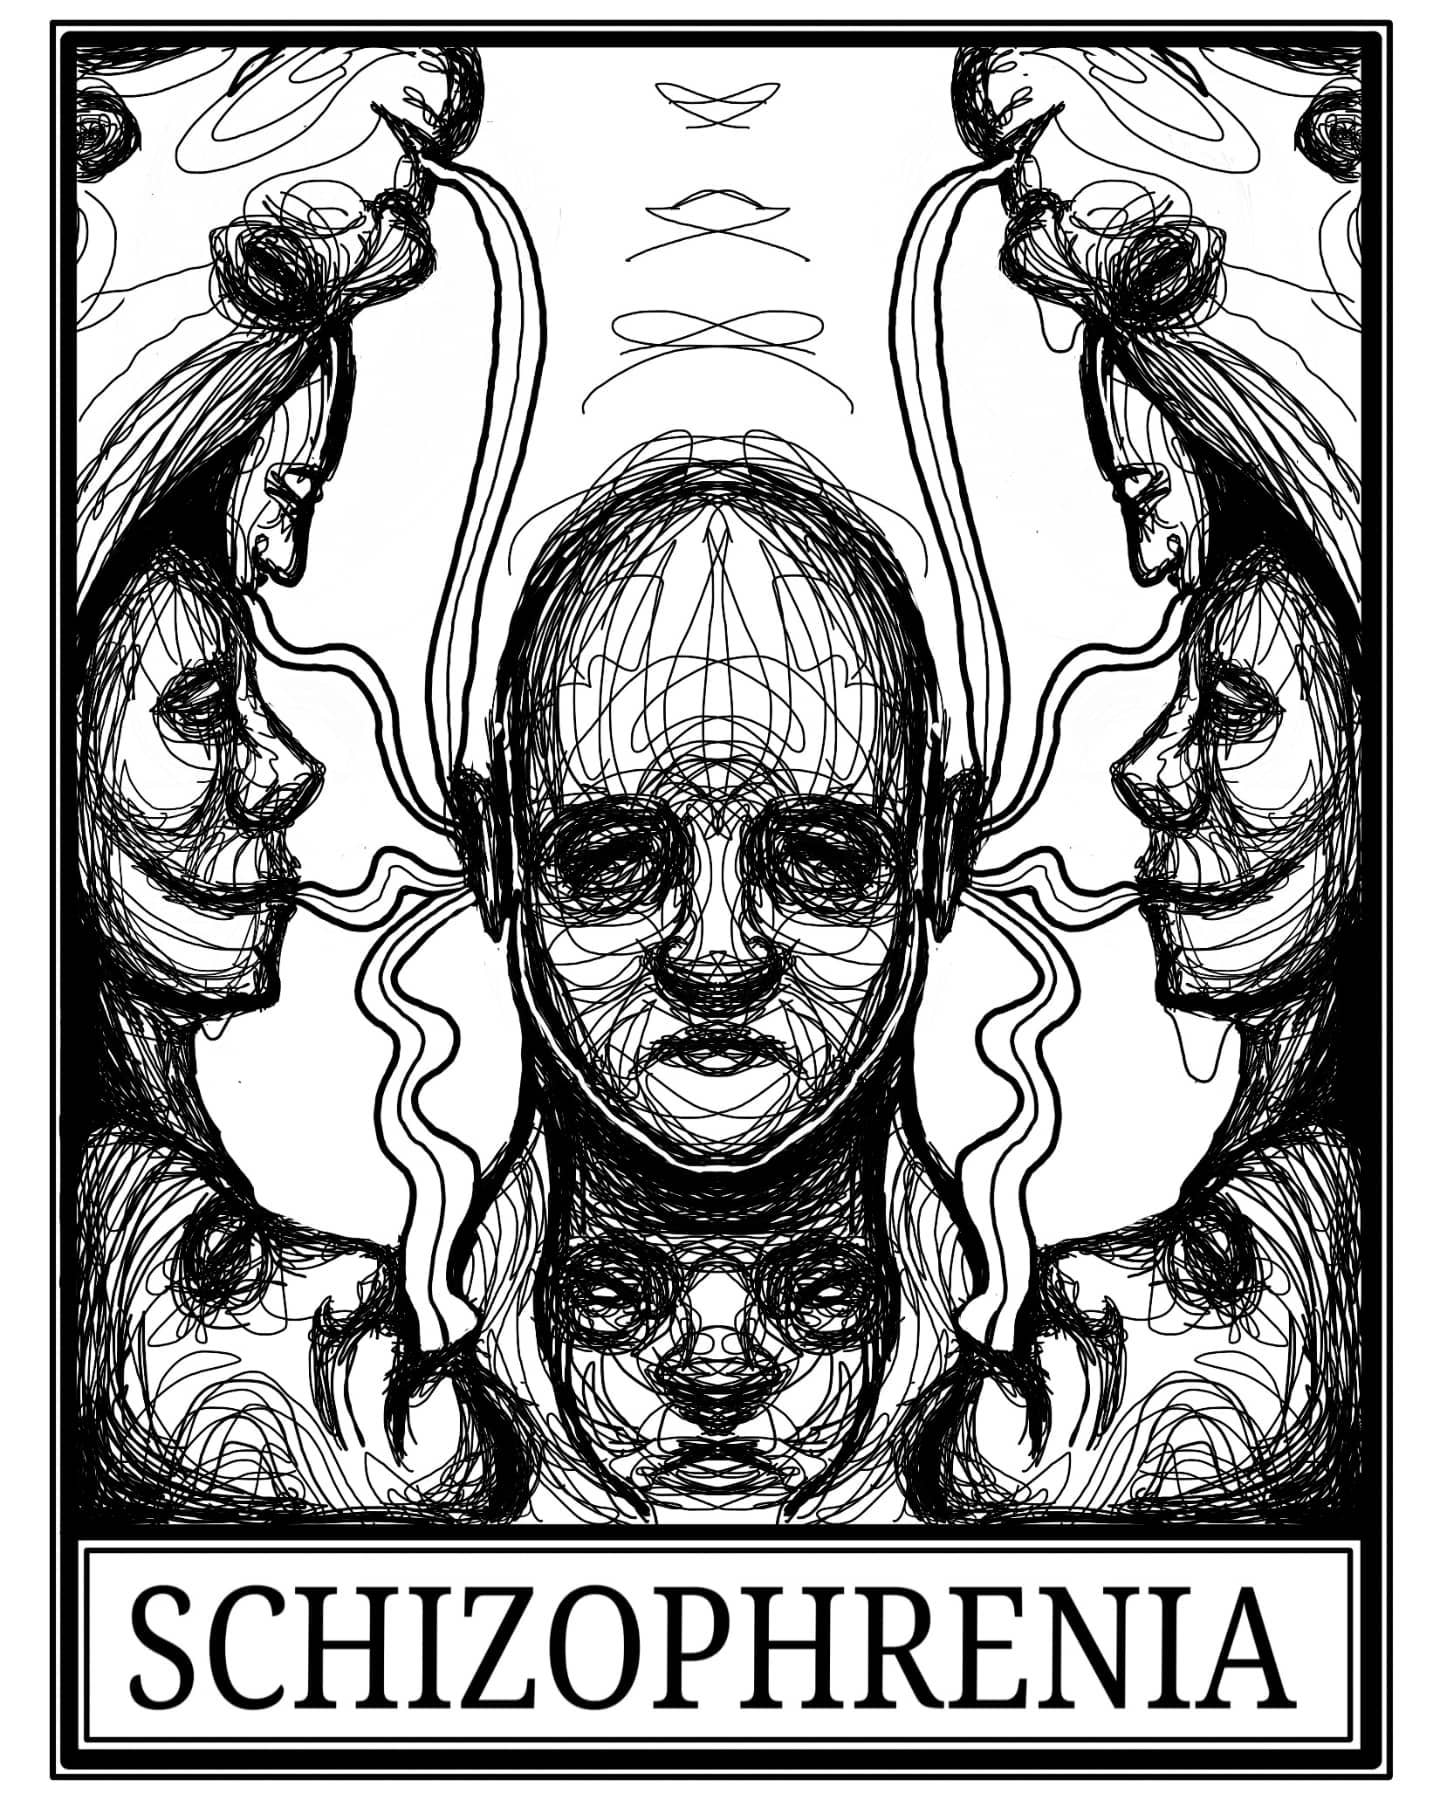 "Schizophrenia" 

Schizophrenia is a challenging mental disorder that varies from person to person. A person diagnosed w